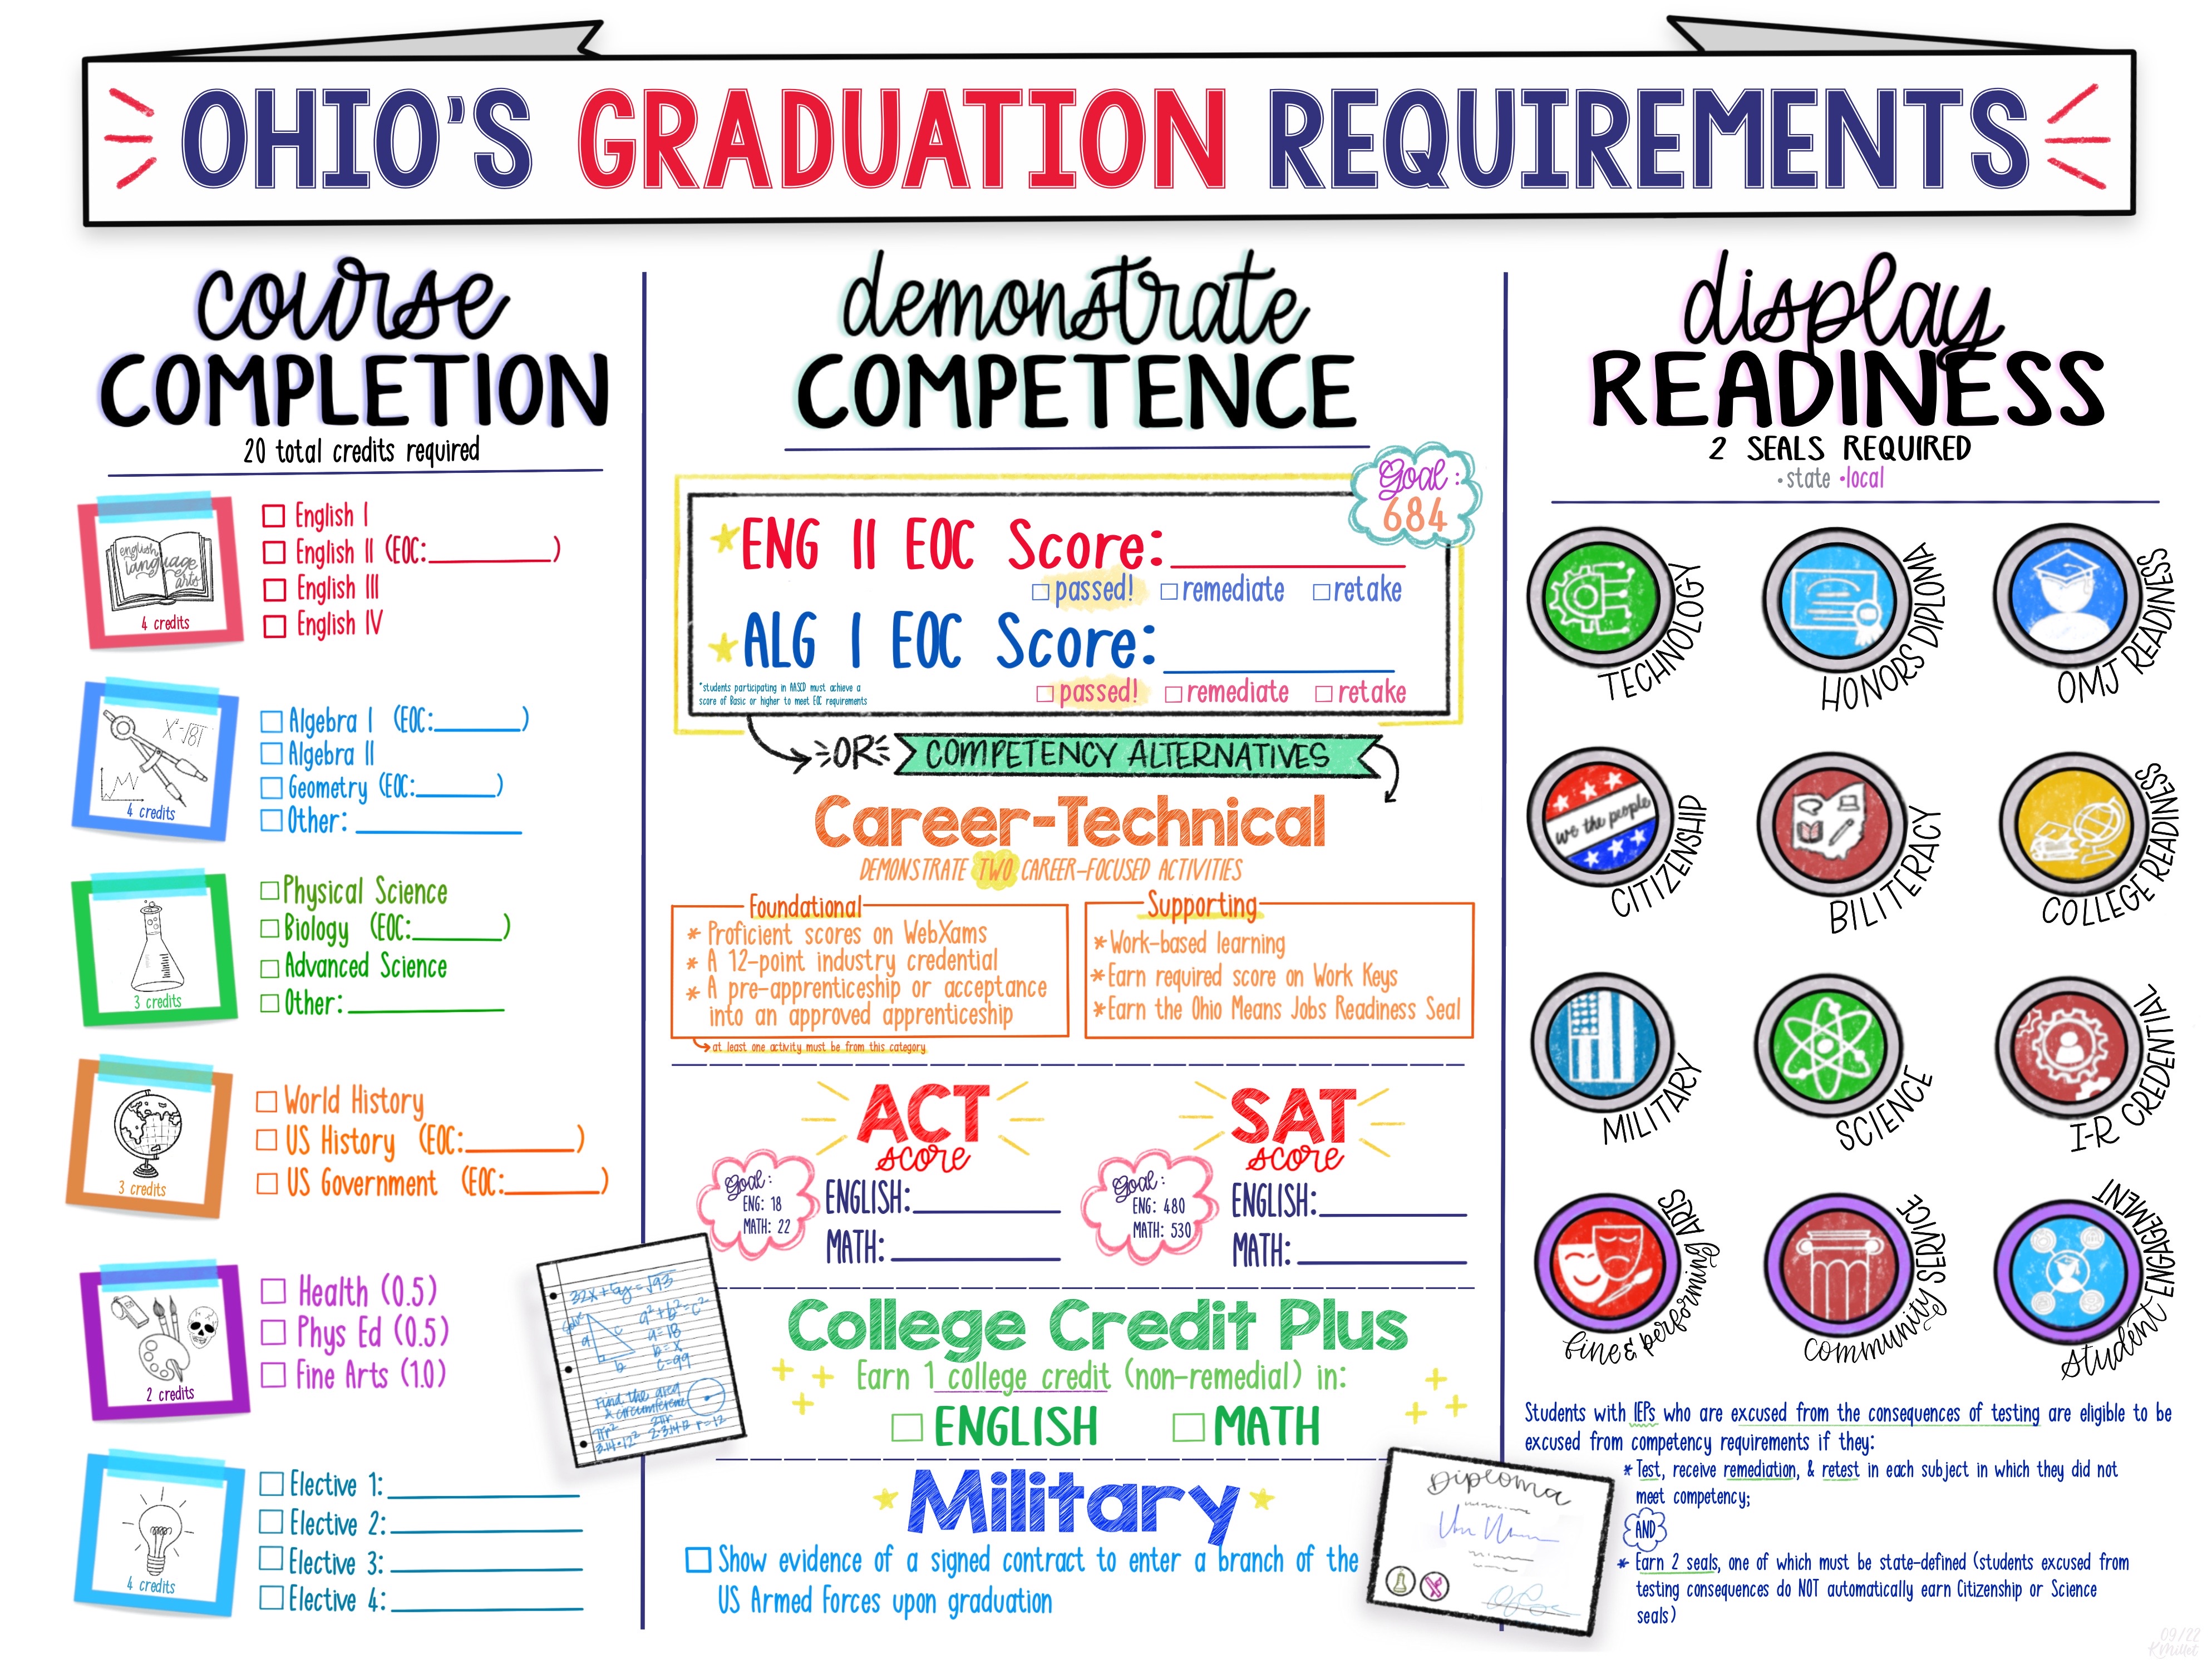 Ohio's Graduation Requirements and Resources